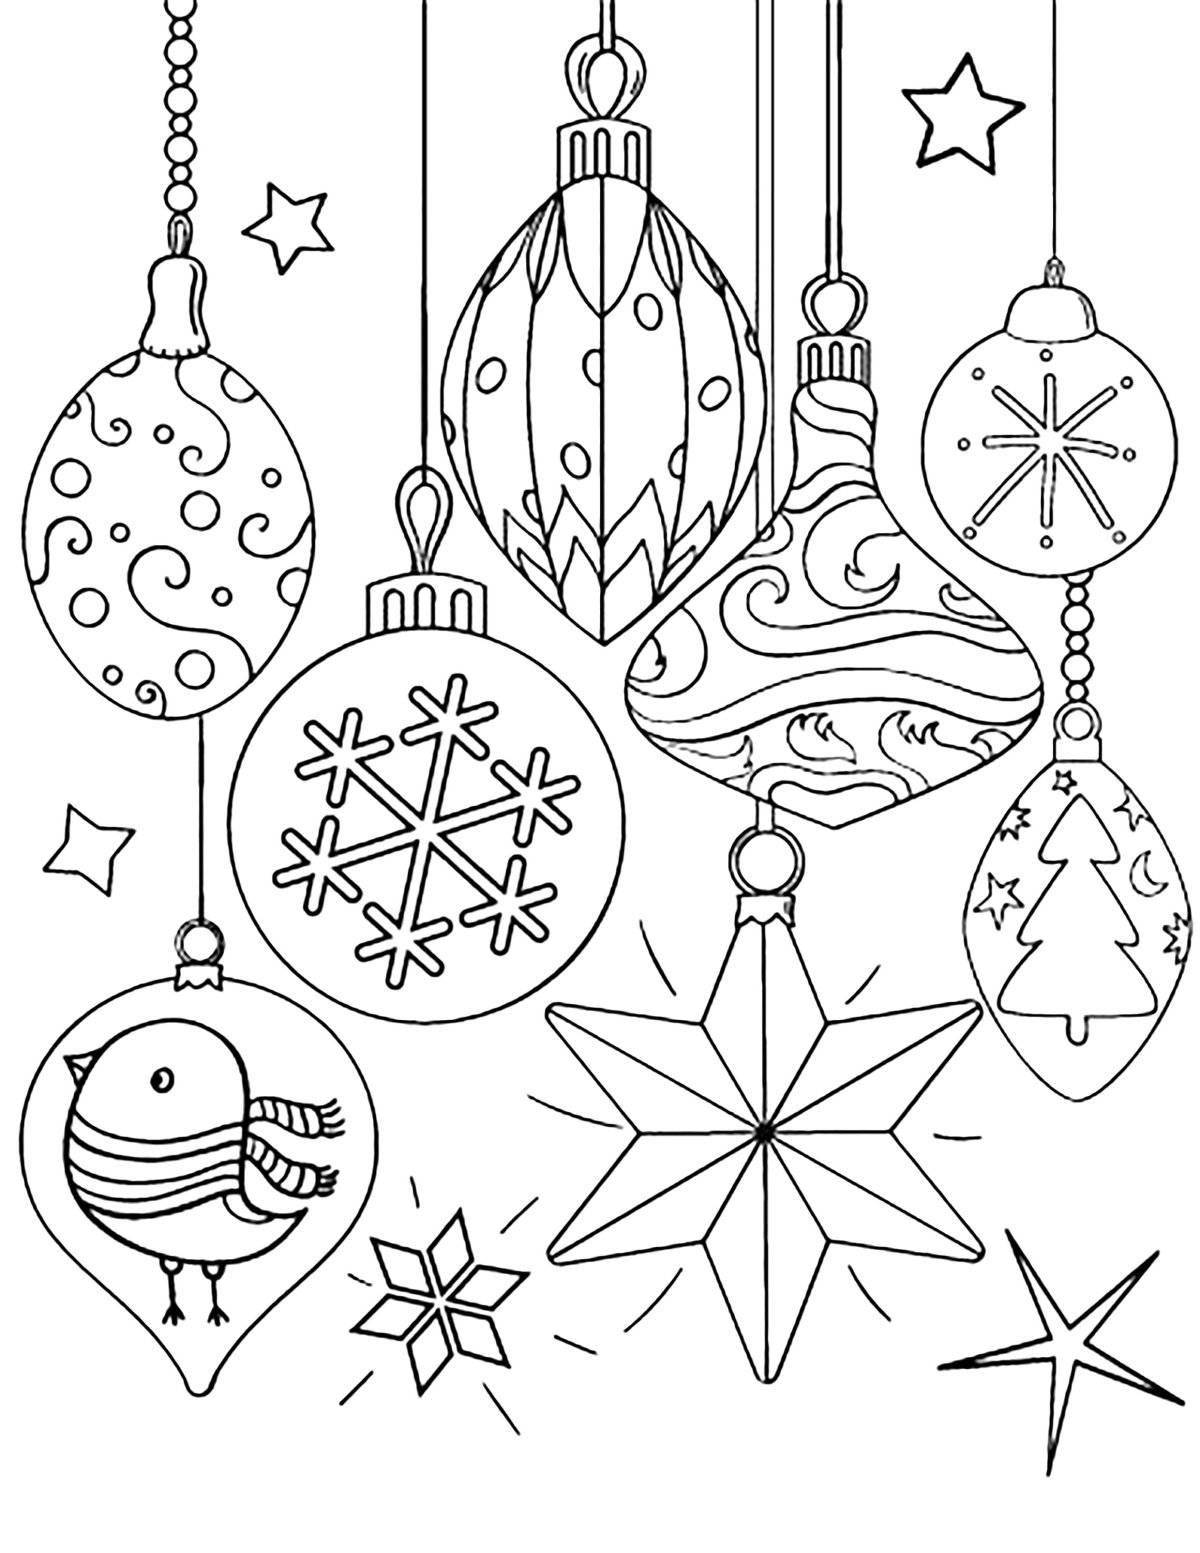 Playful Christmas coloring toy